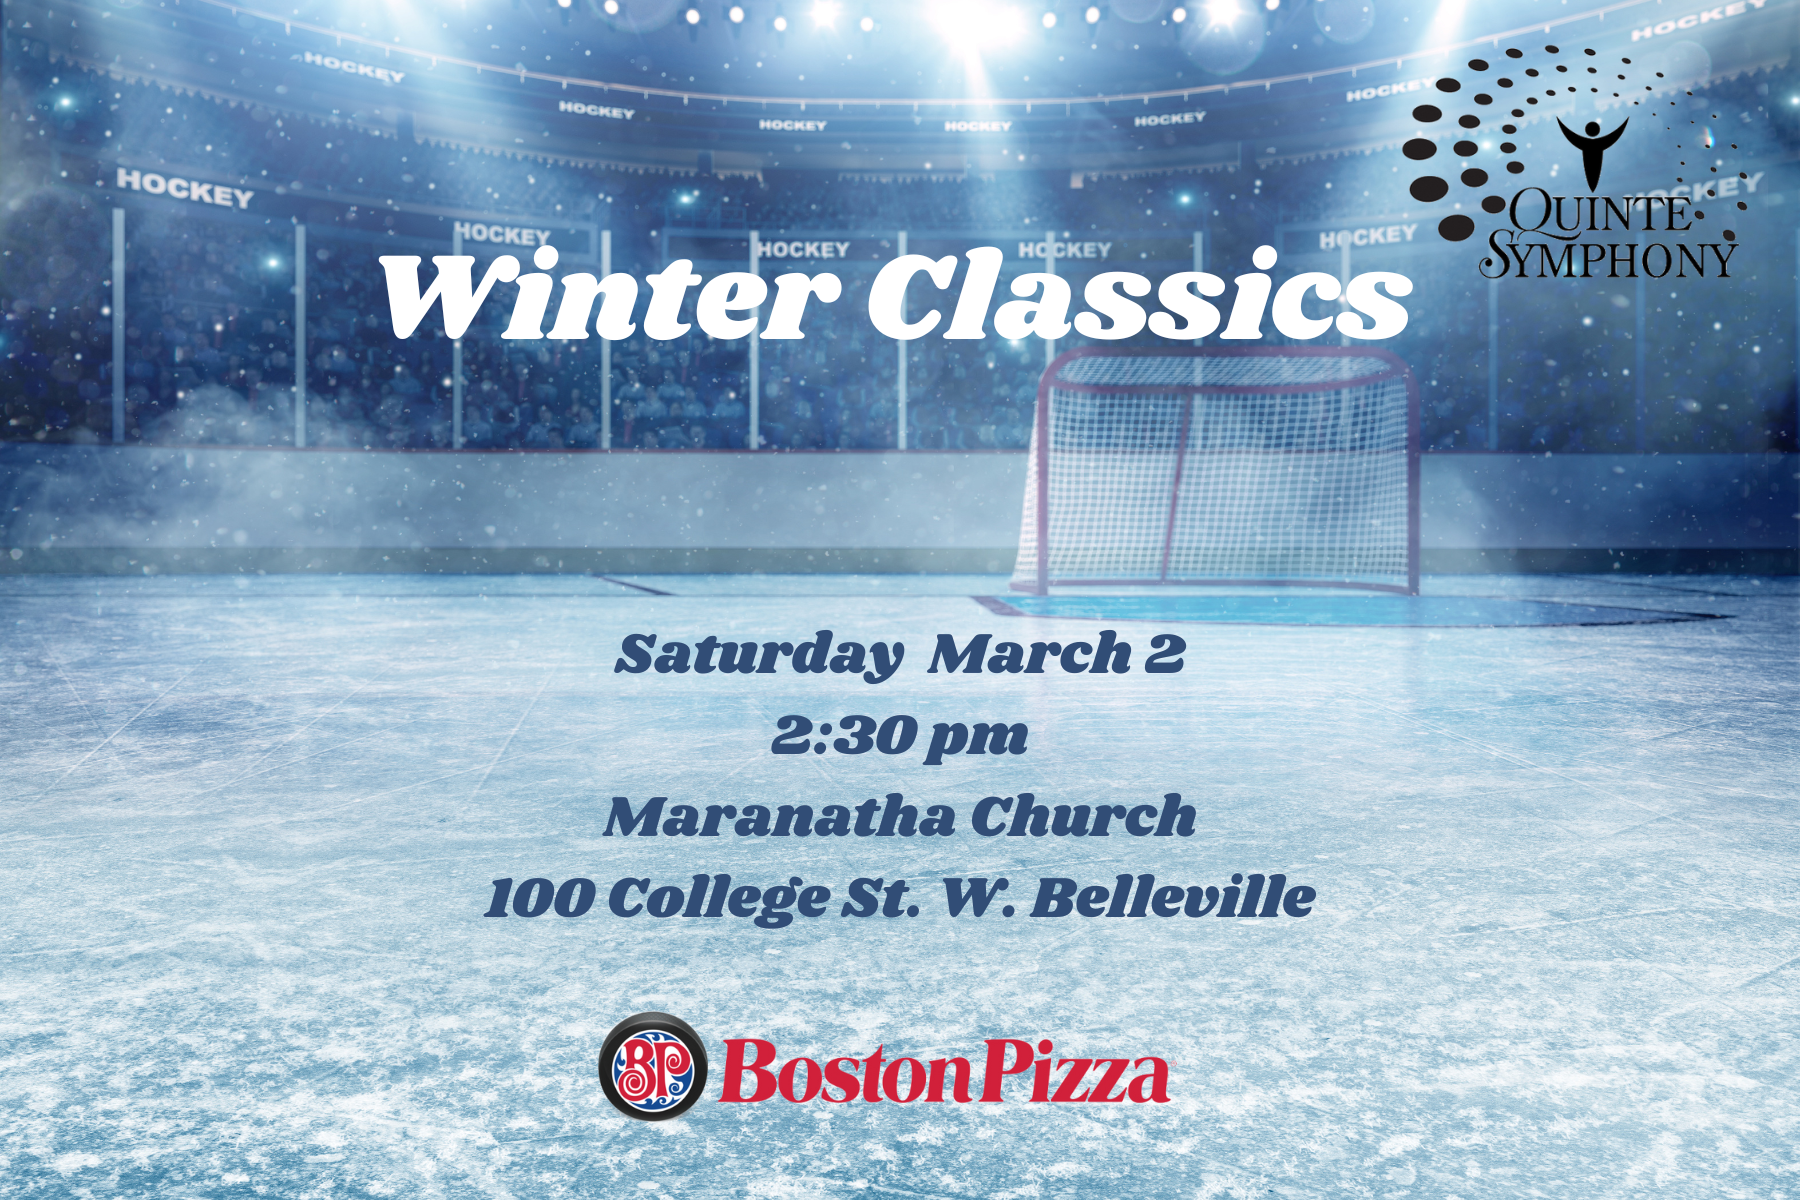 Event poster with hockey rink. Titled "Winter Classics"